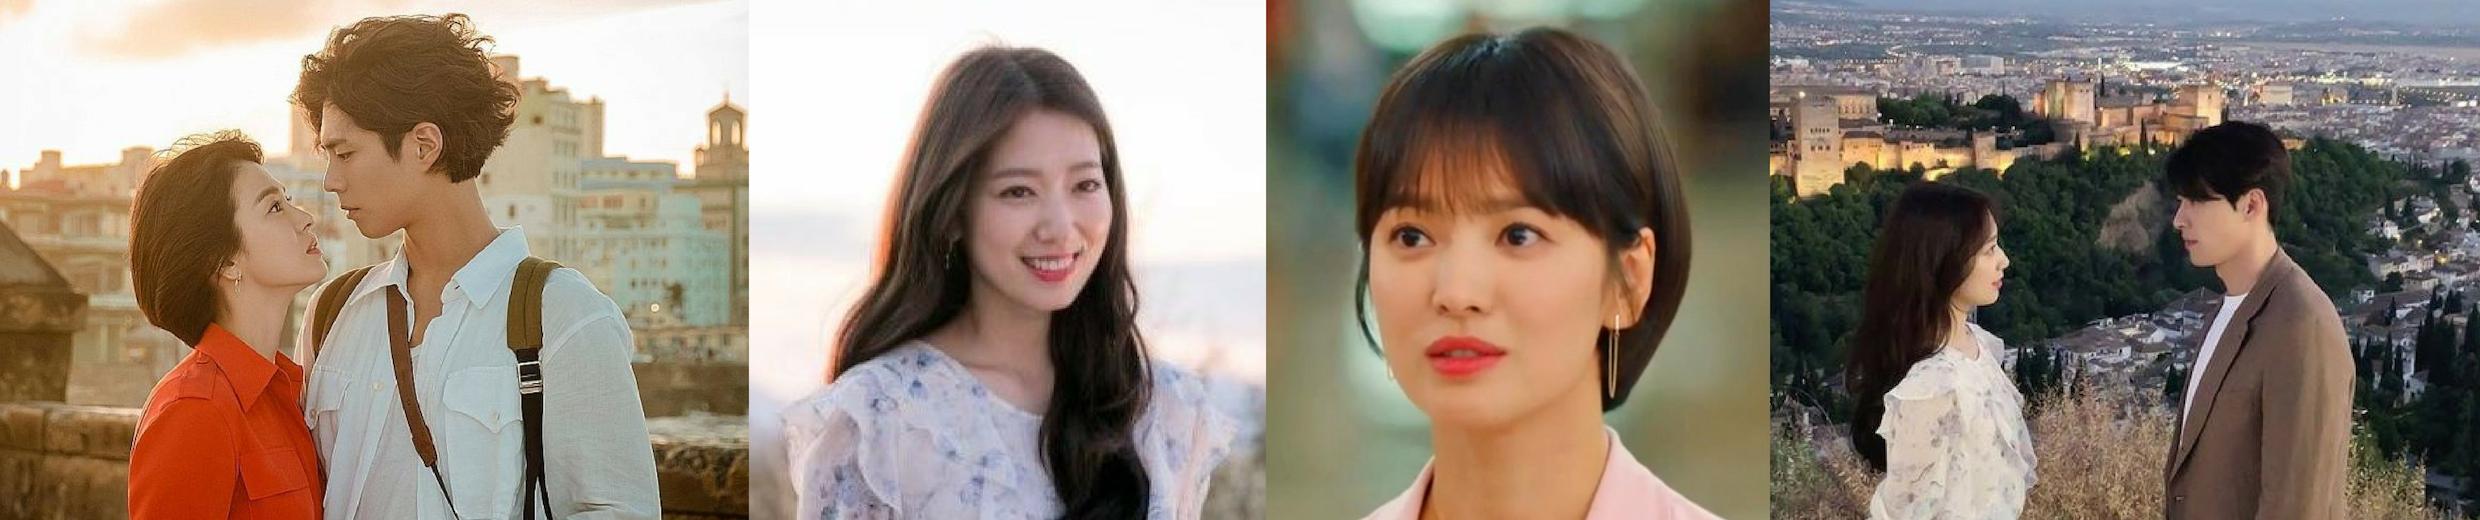 Which Are You: Song Hye Kyo in 'Encounter' or Park Shin Hye in 'Memories of the Alhambra'?